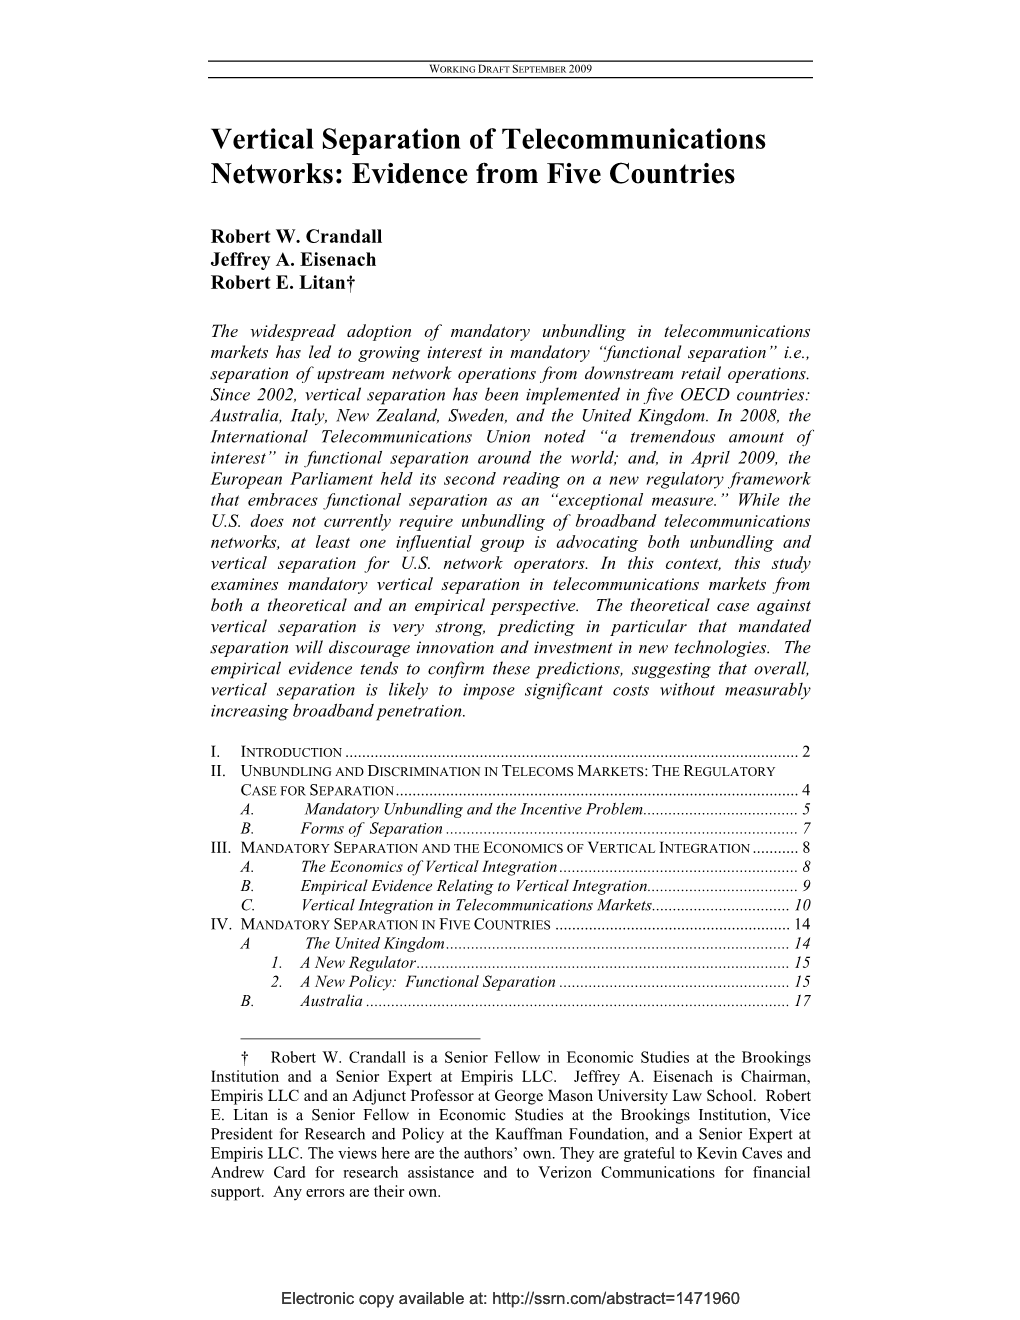 Vertical Separation of Telecommunications Networks: Evidence from Five Countries